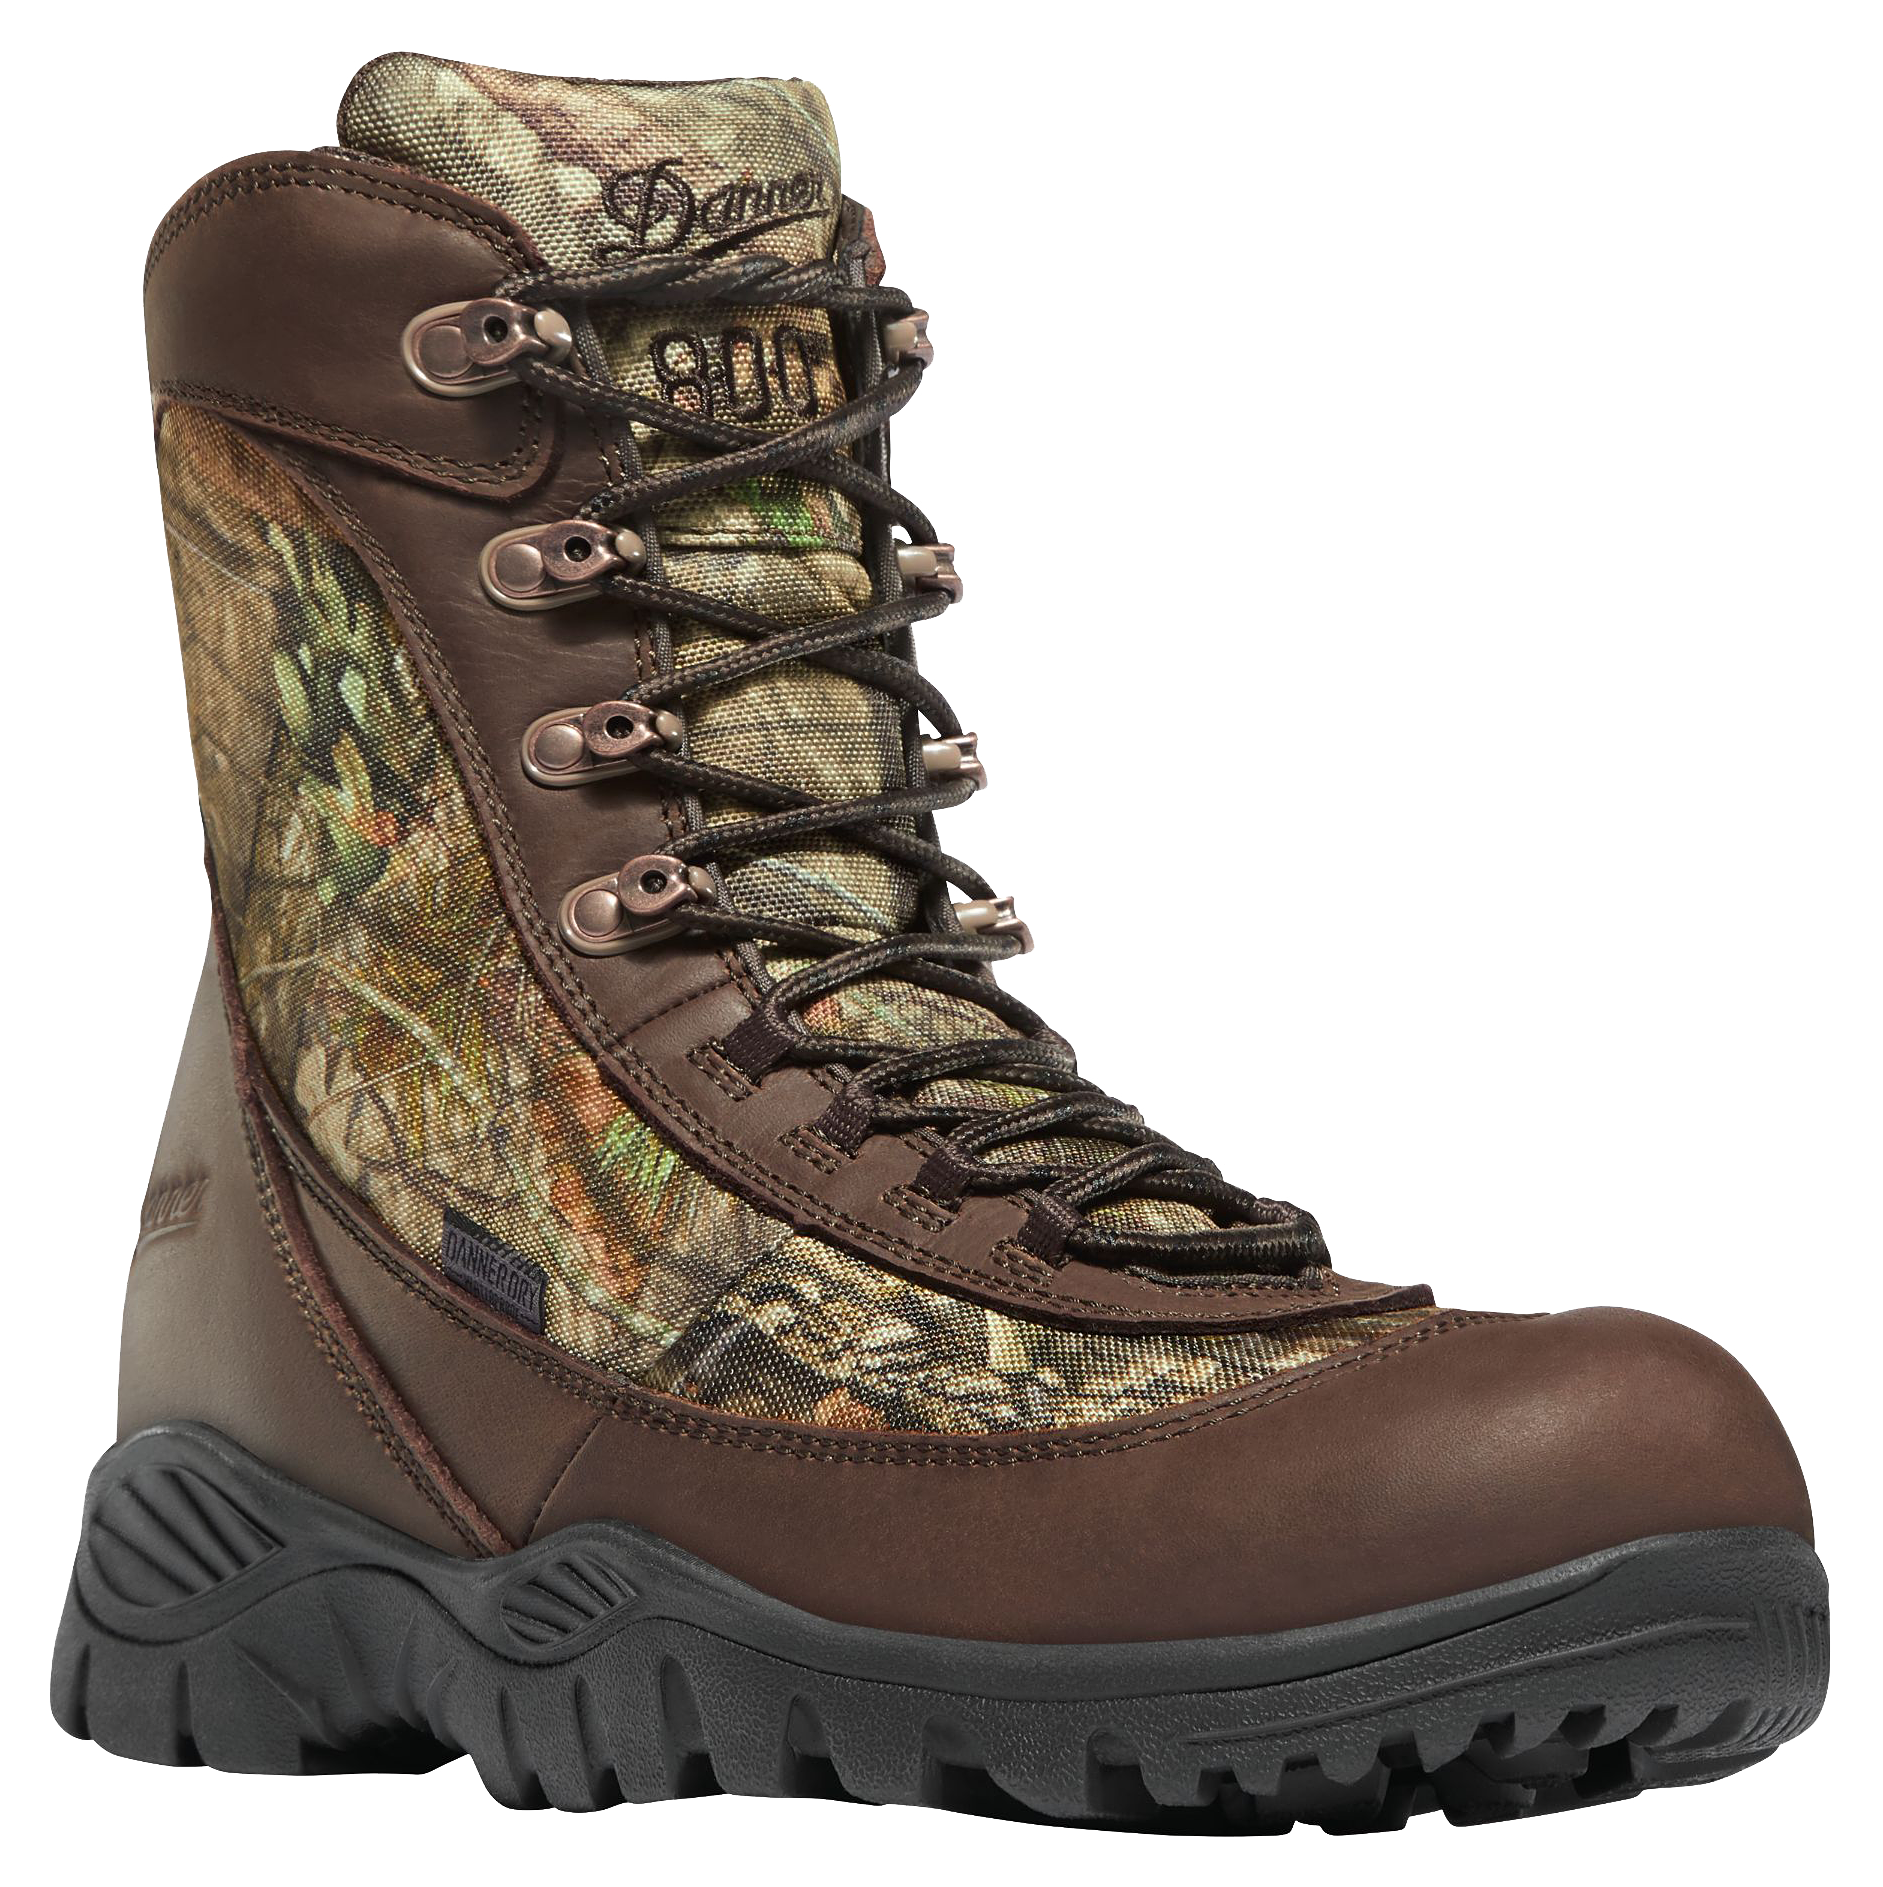 Danner Element 8″ 800-Gram Insulated Waterproof Hunting Boots for Men - Mossy Oak Break-Up Country - 9W